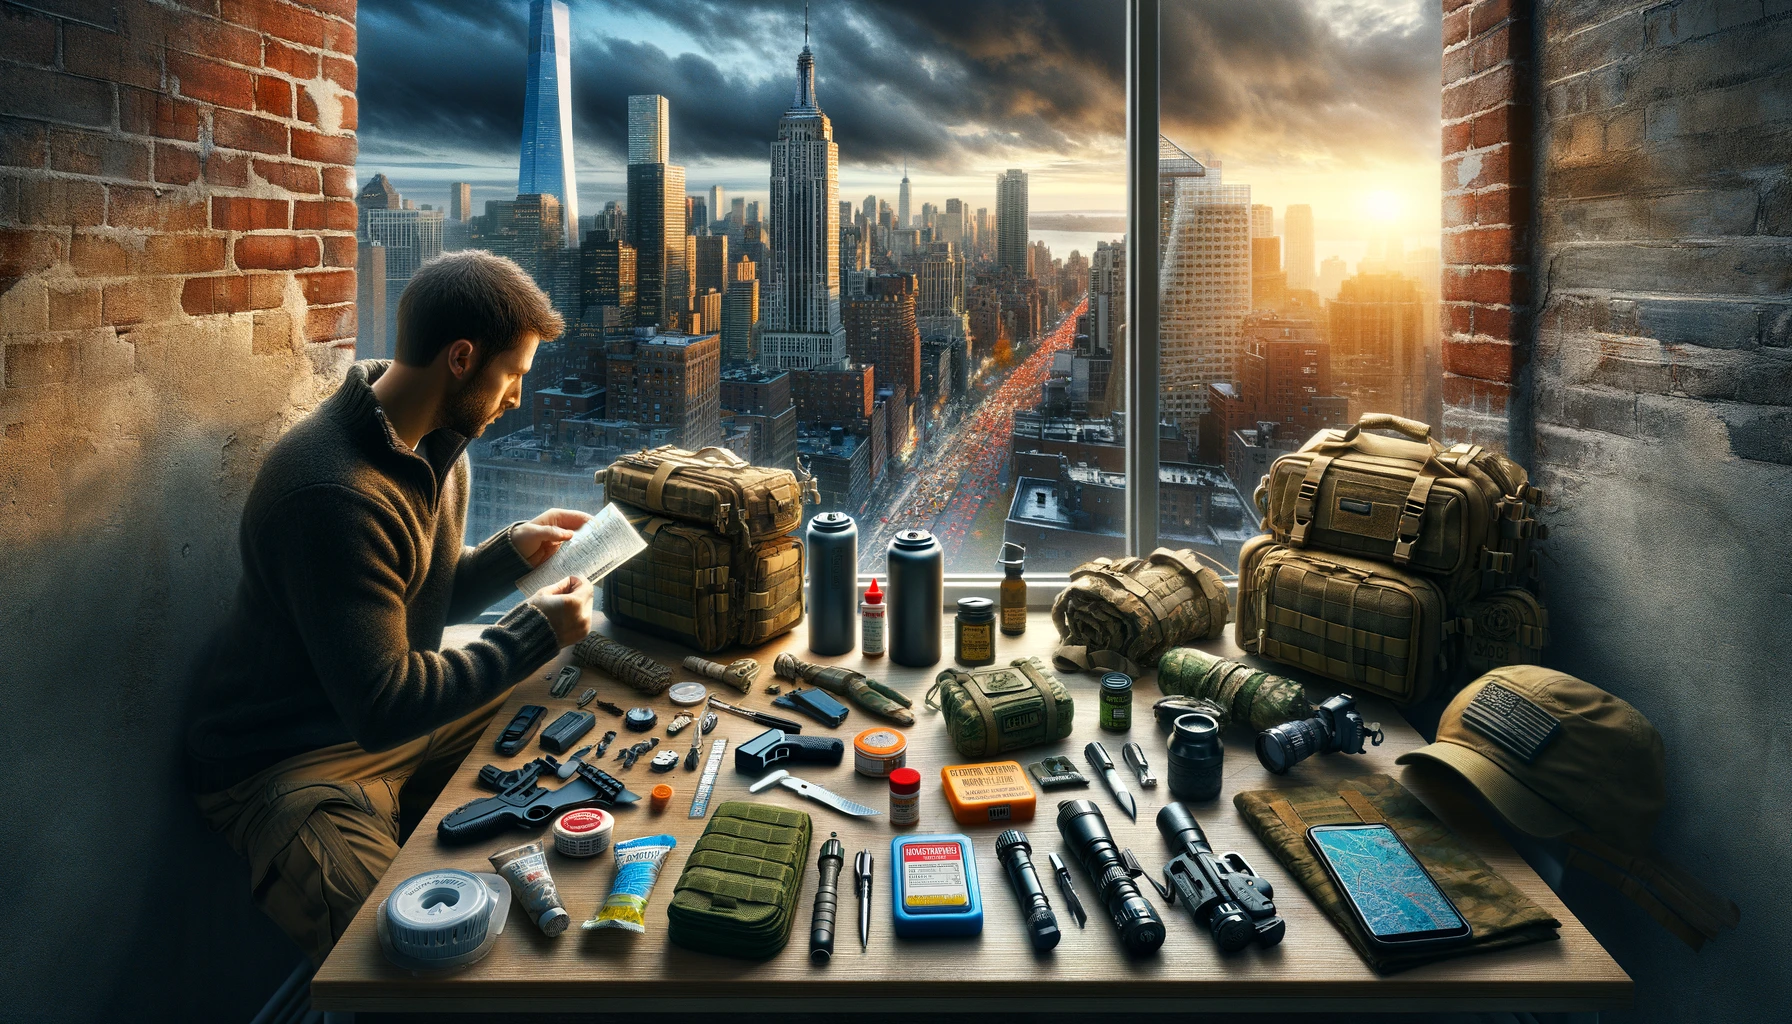 Prepper organizing an essential urban bug out bag in a high-rise apartment overlooking the city, with items like water filter, multi-tool, and maps laid out, emphasizing meticulous preparation for urban survival